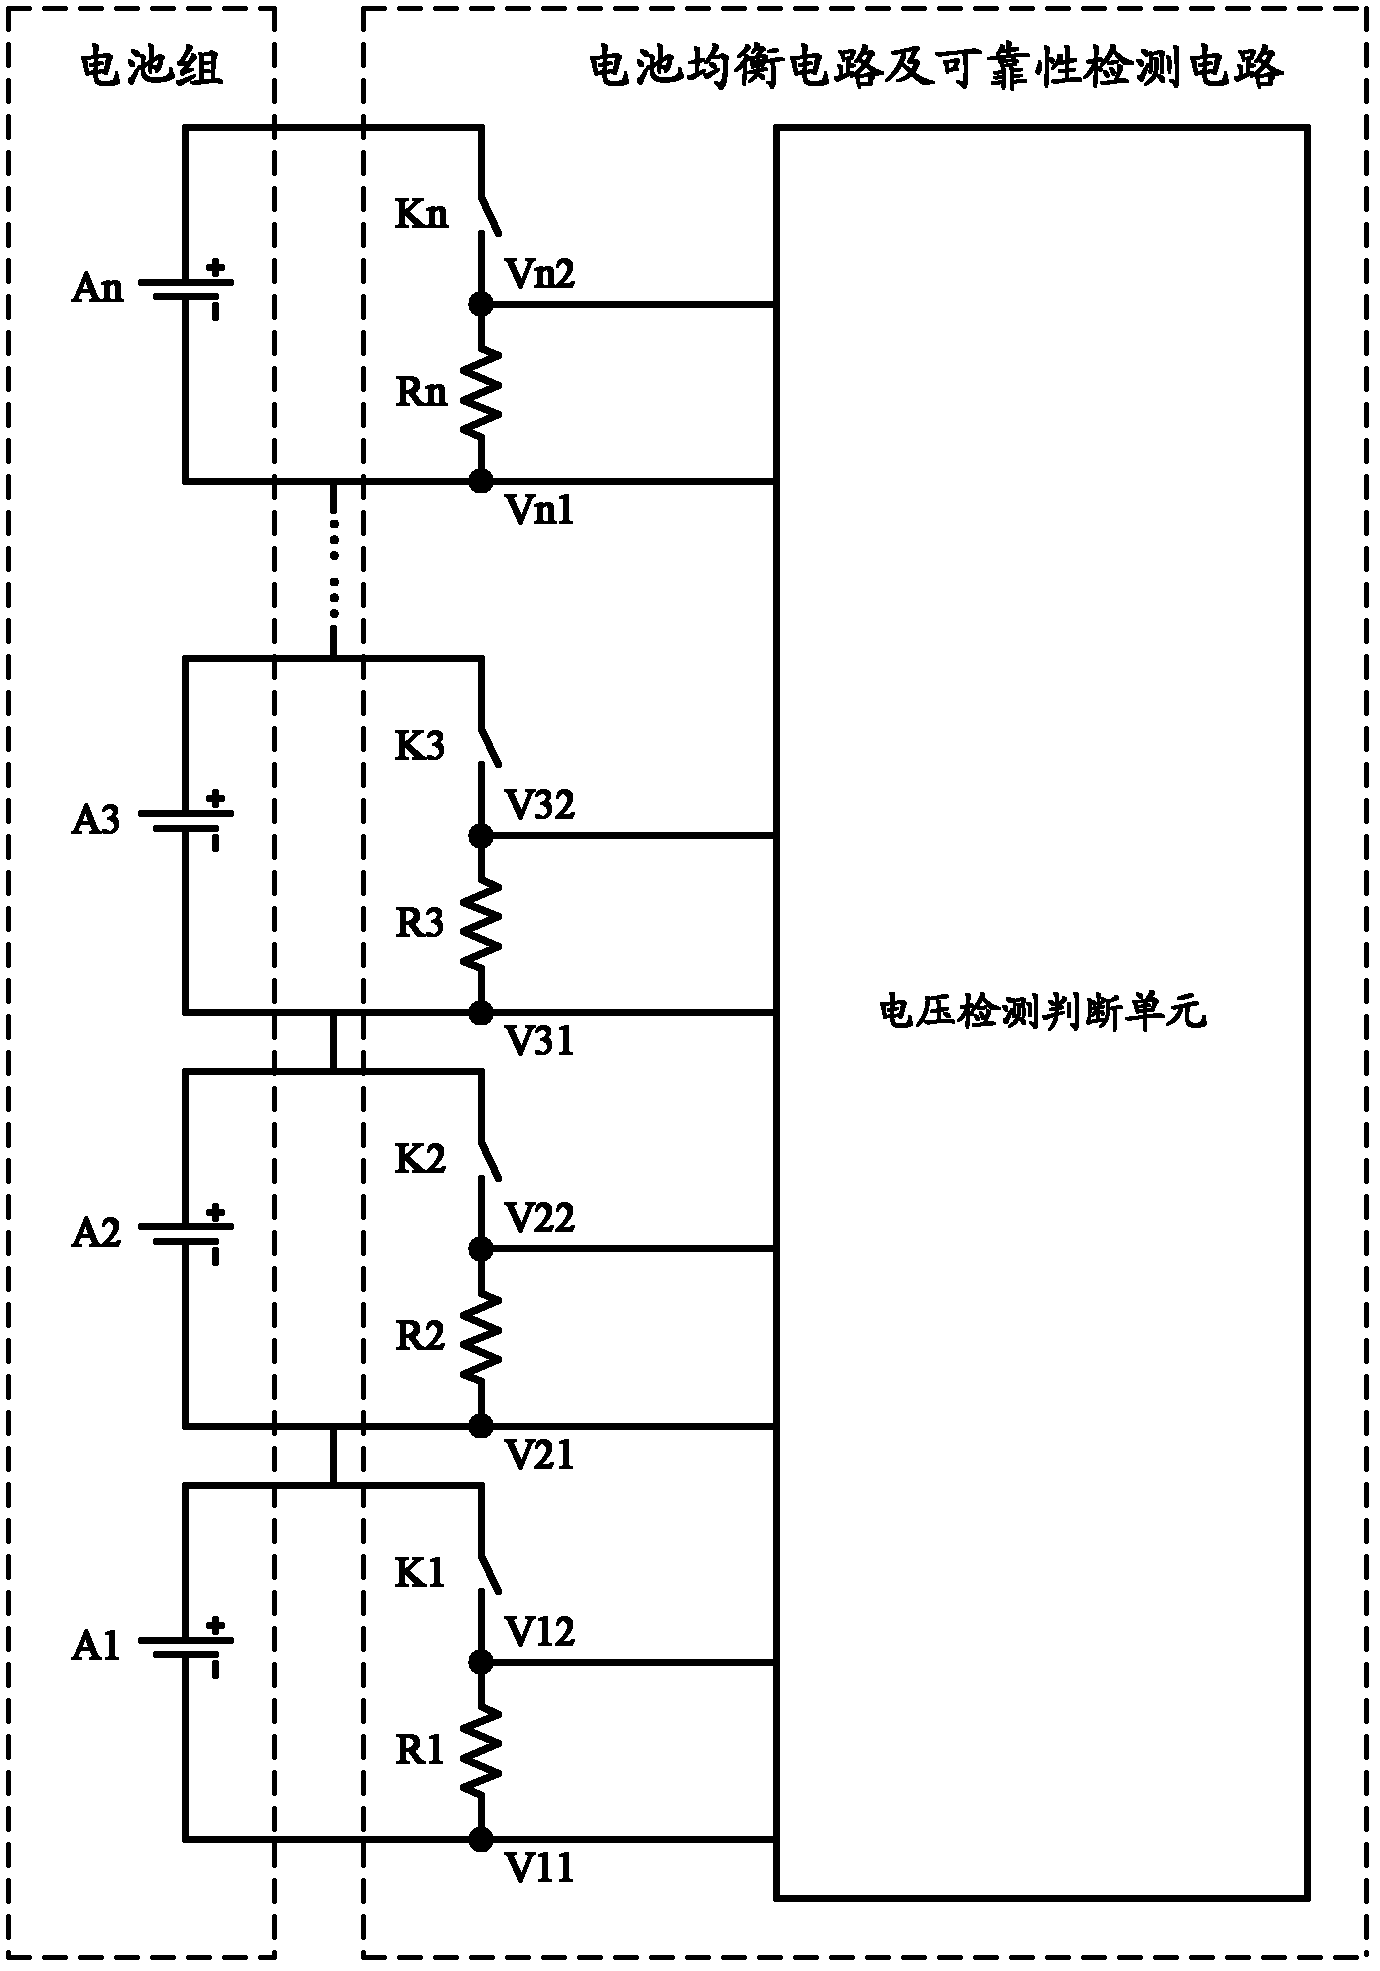 Reliability detecting system for battery balancing circuit